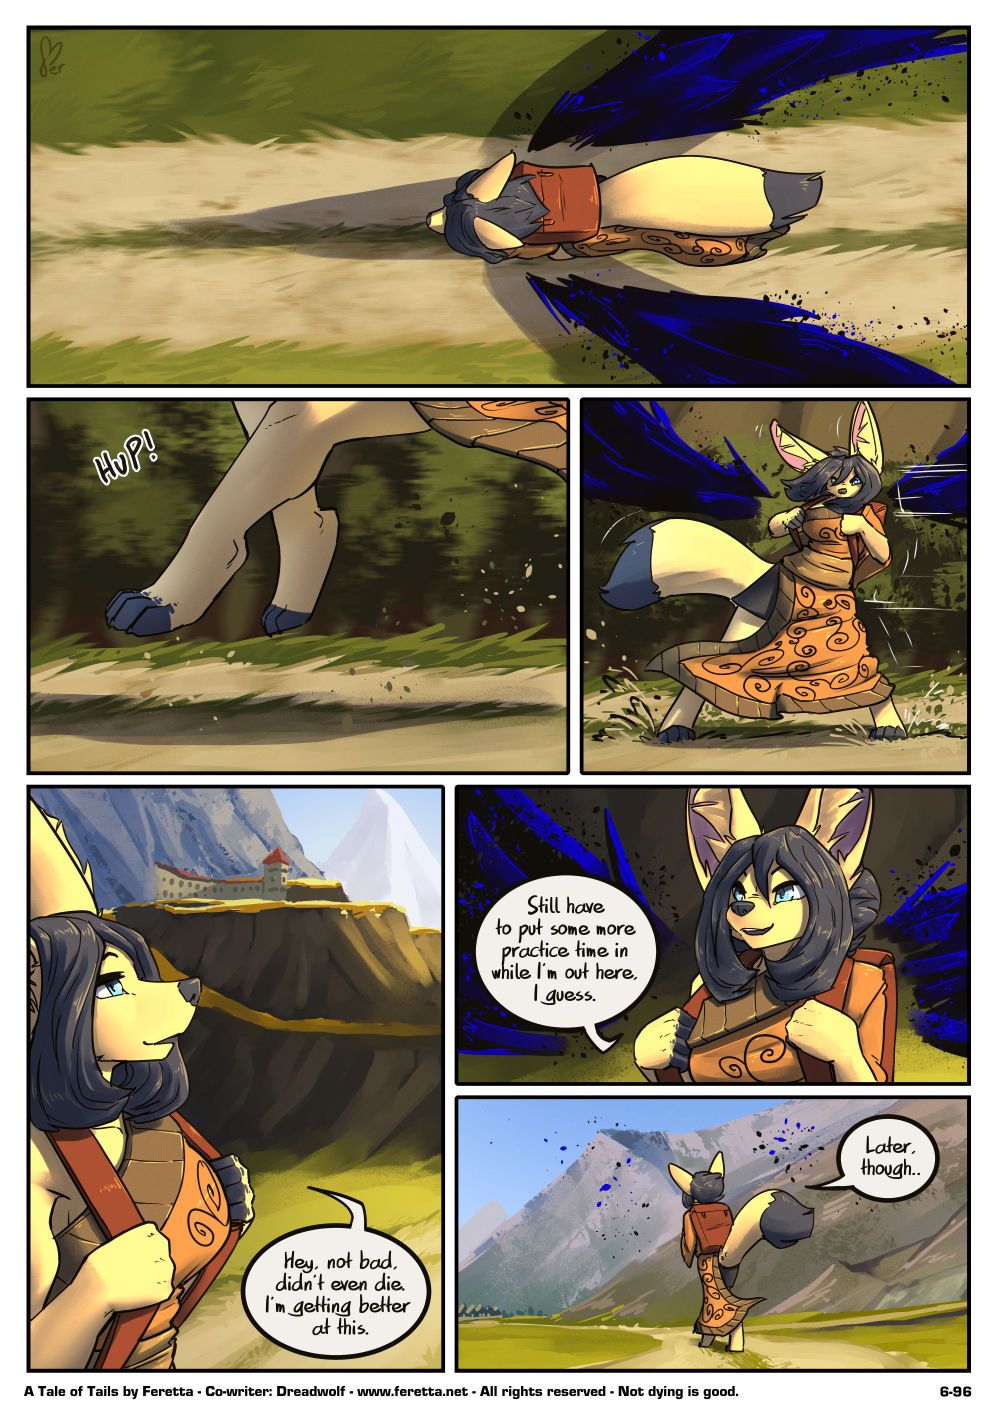 [Feretta] A Tale of Tails: Chapter 6 - Paths converge (ongoing) 99